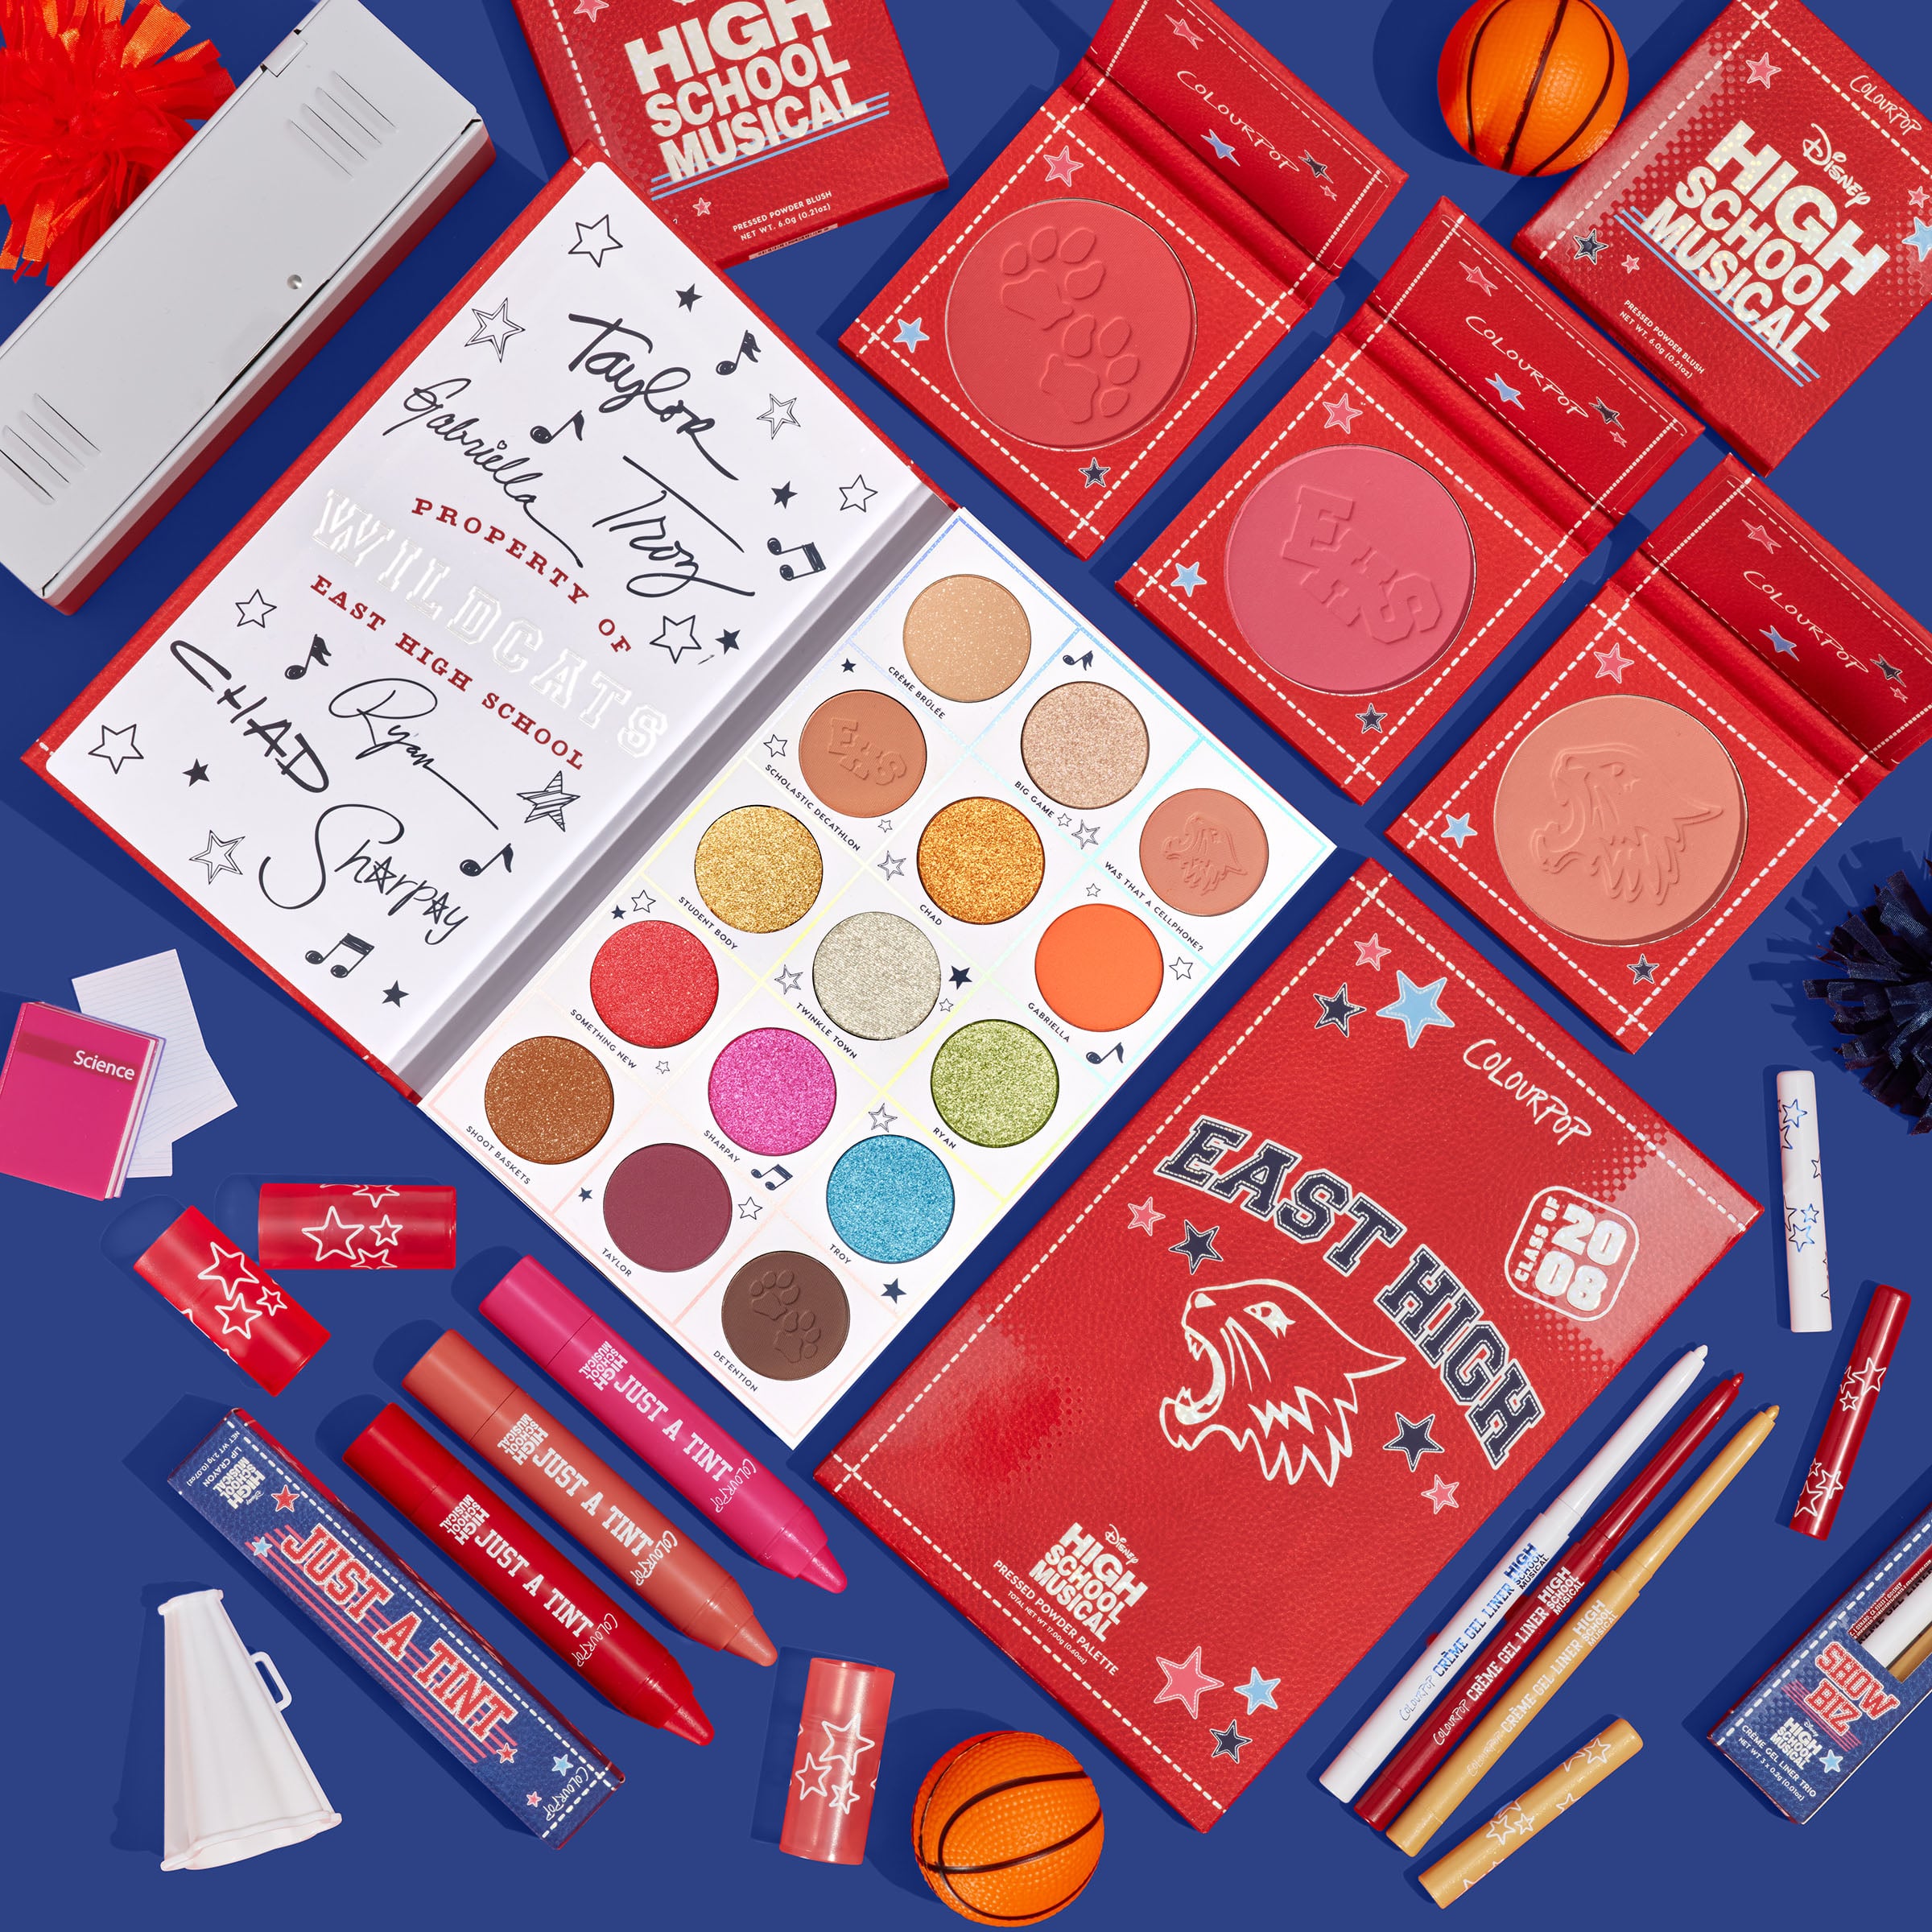 Colourpop Cosmetics Made the Perfect High School Musical